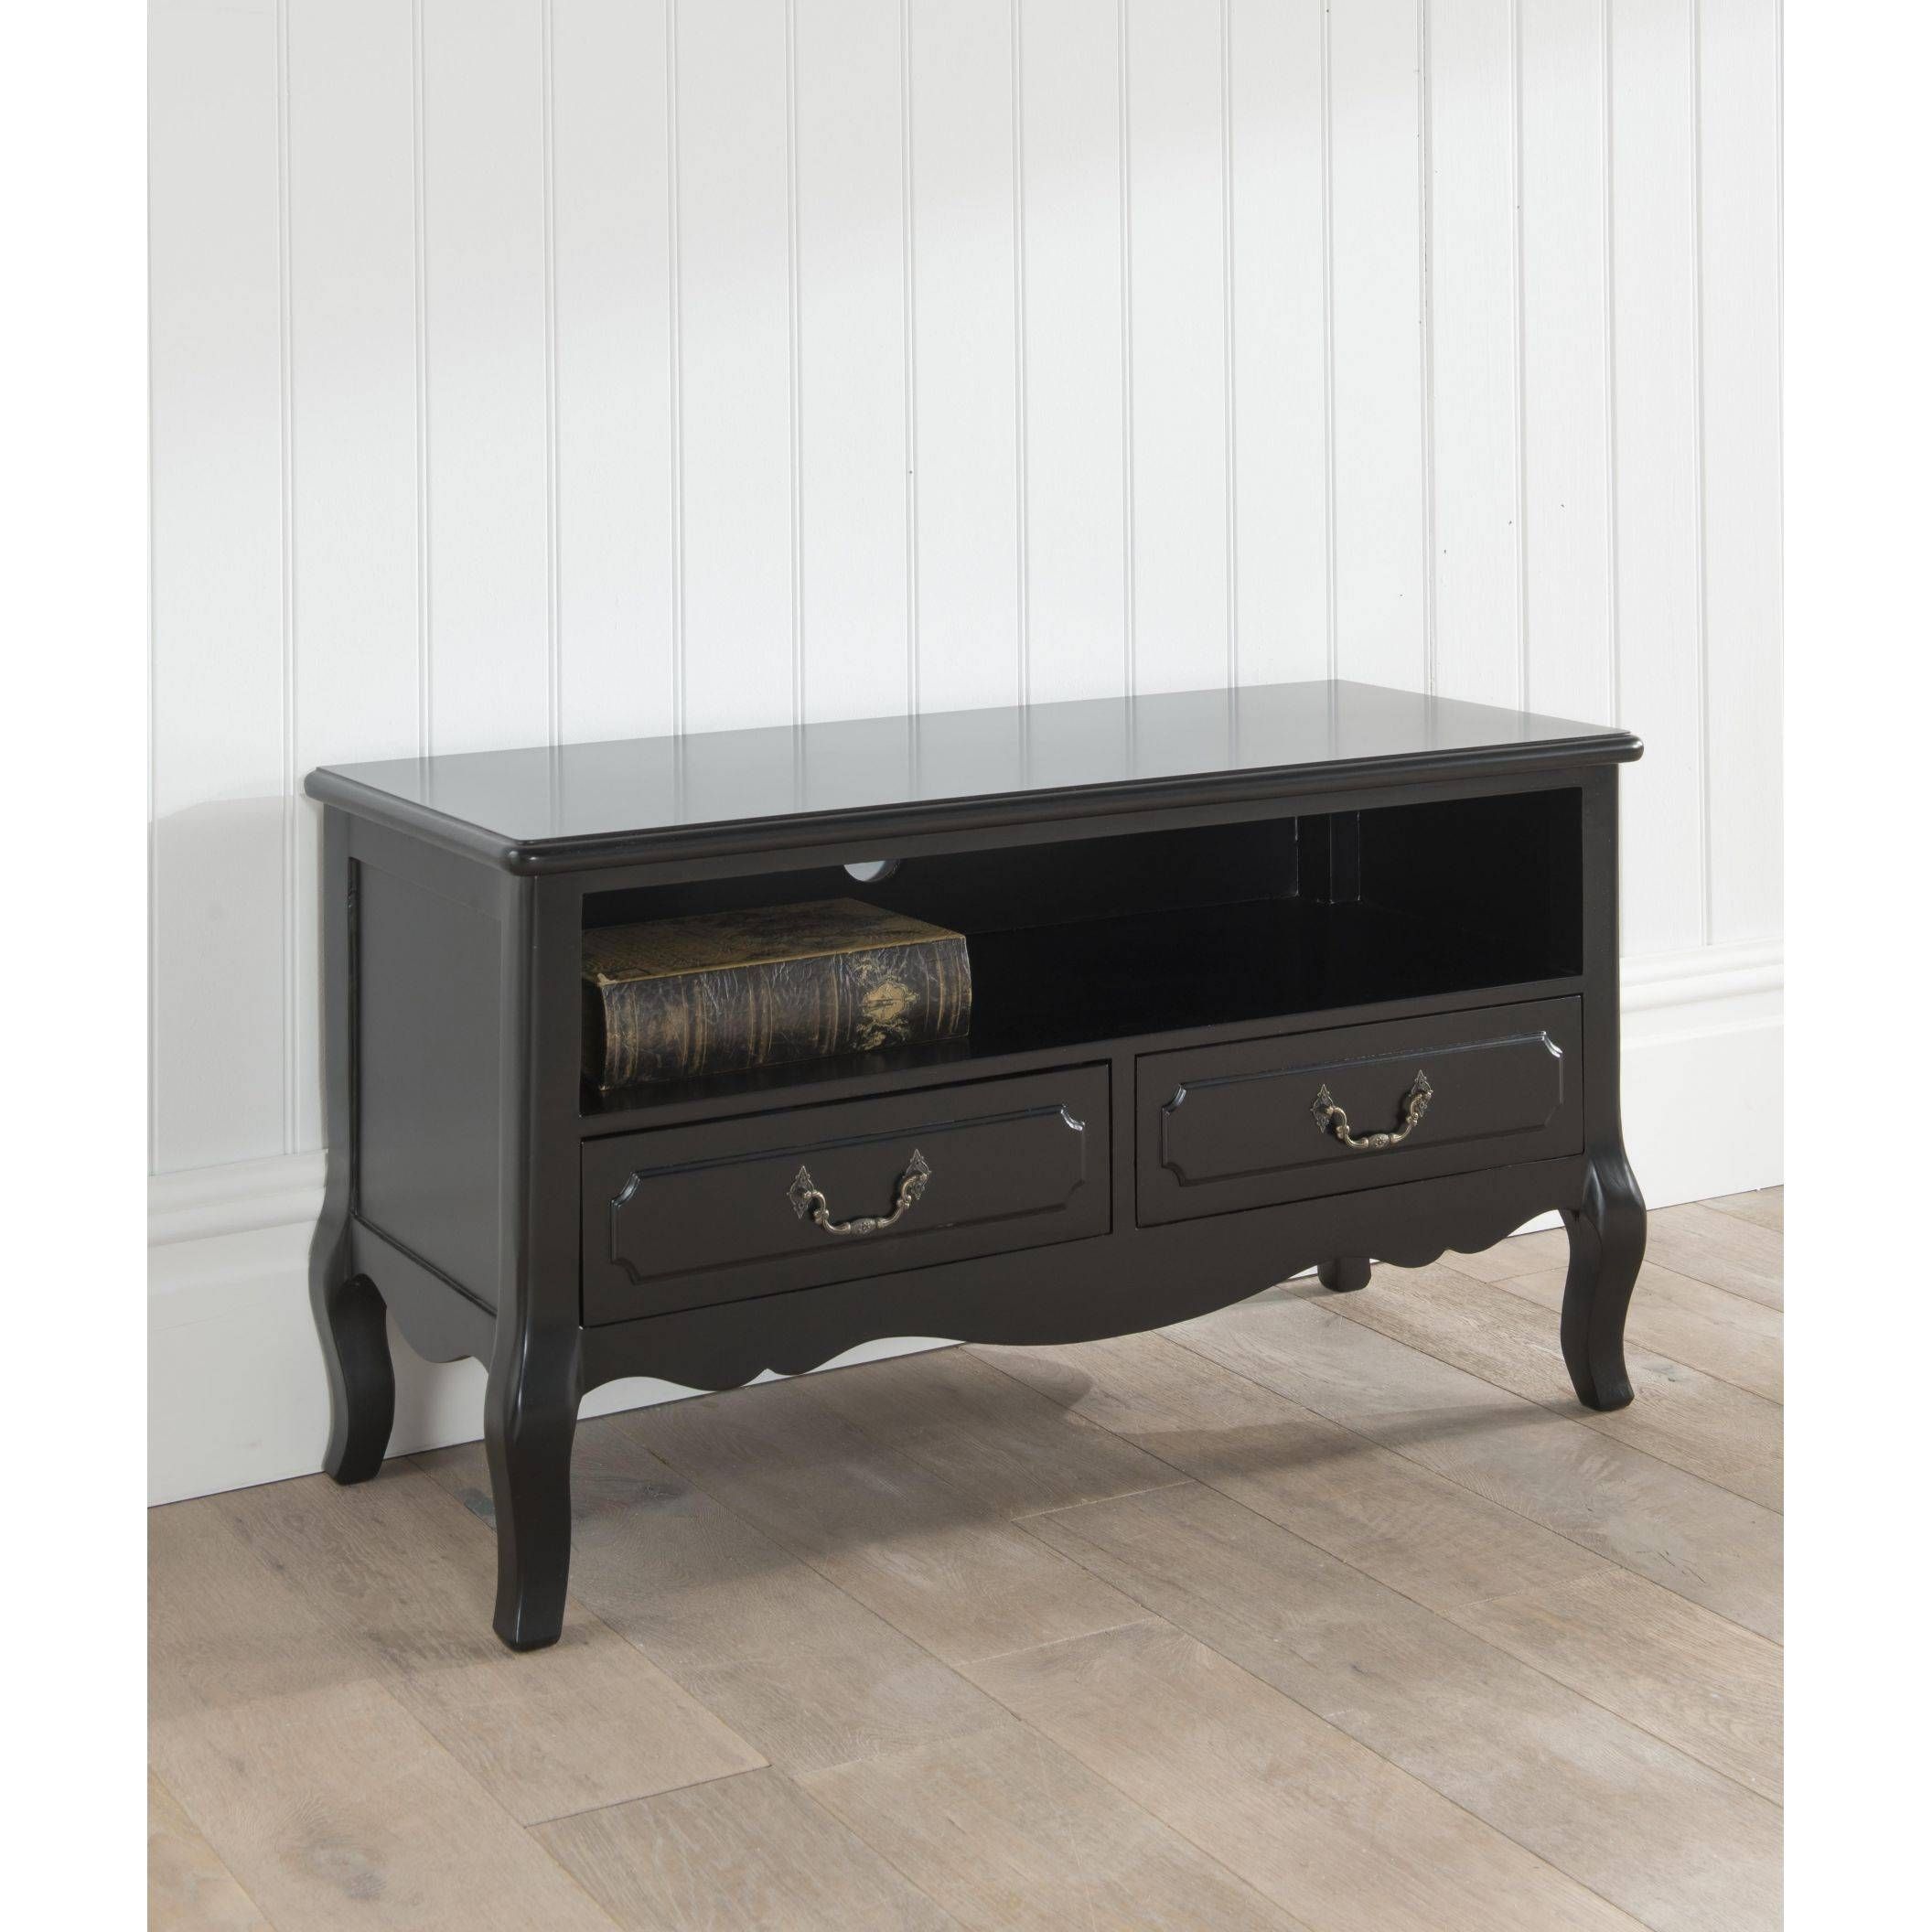 Antique French Tv Stand | Black French Style Furniture Intended For Antique Style Tv Stands (View 1 of 15)